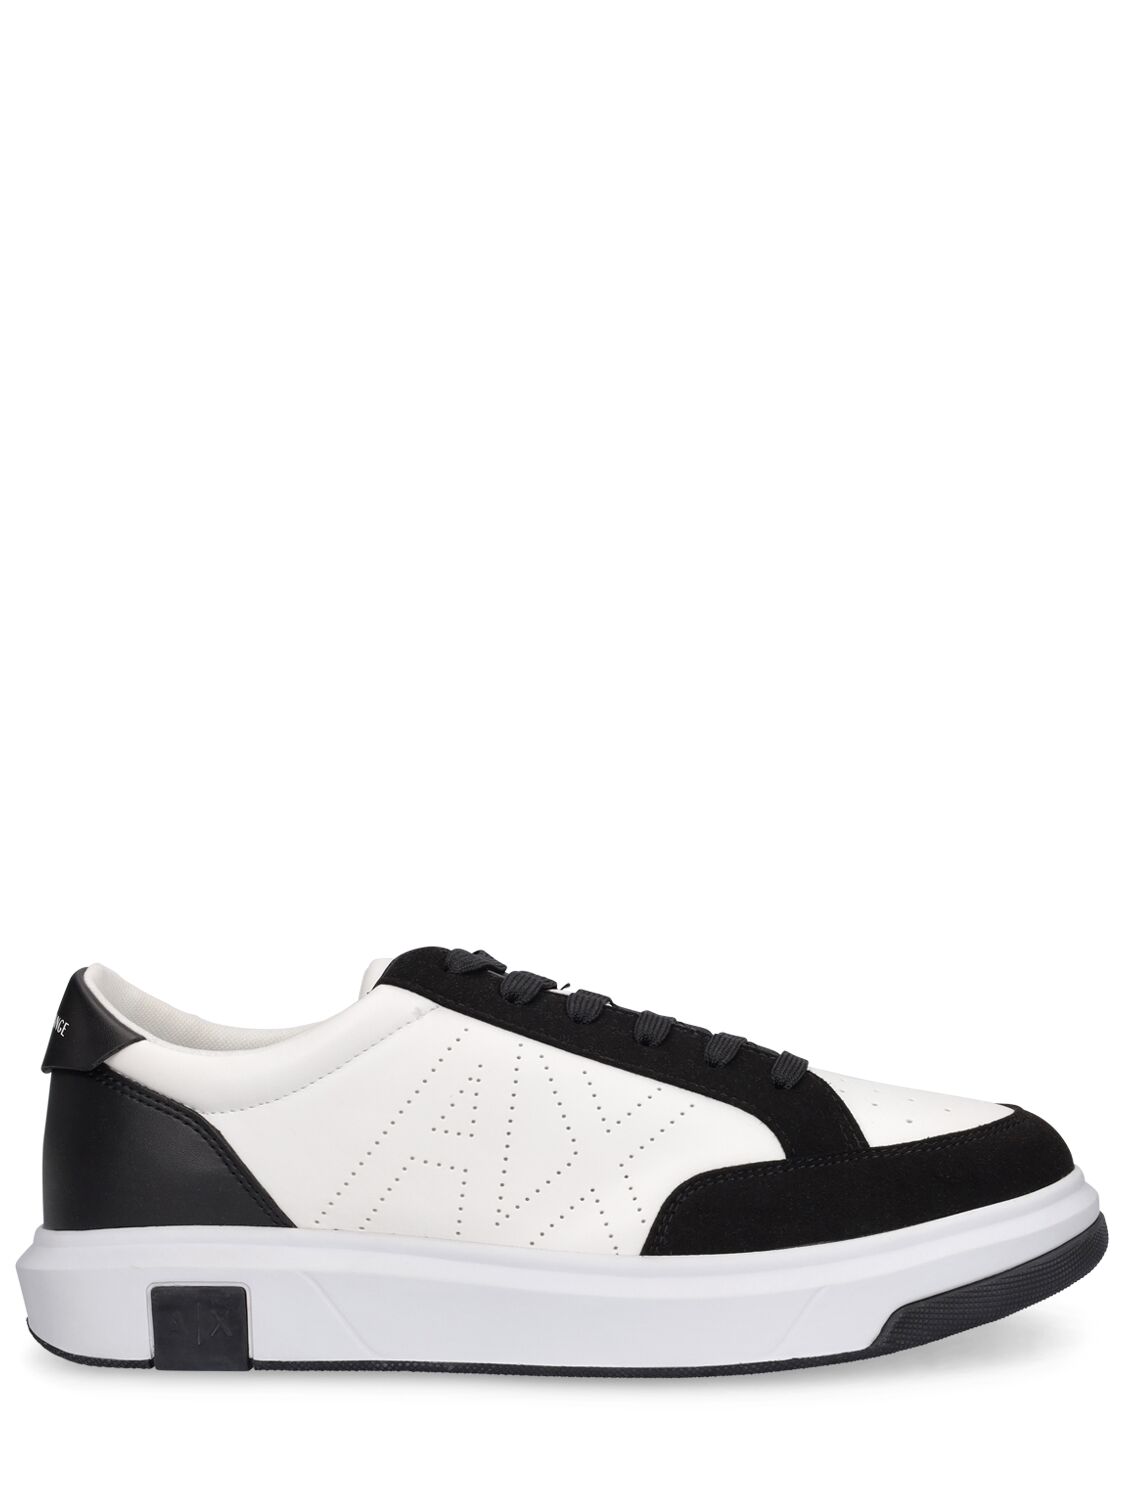 Armani Exchange Official Store Sneakers In Bianco E Nero